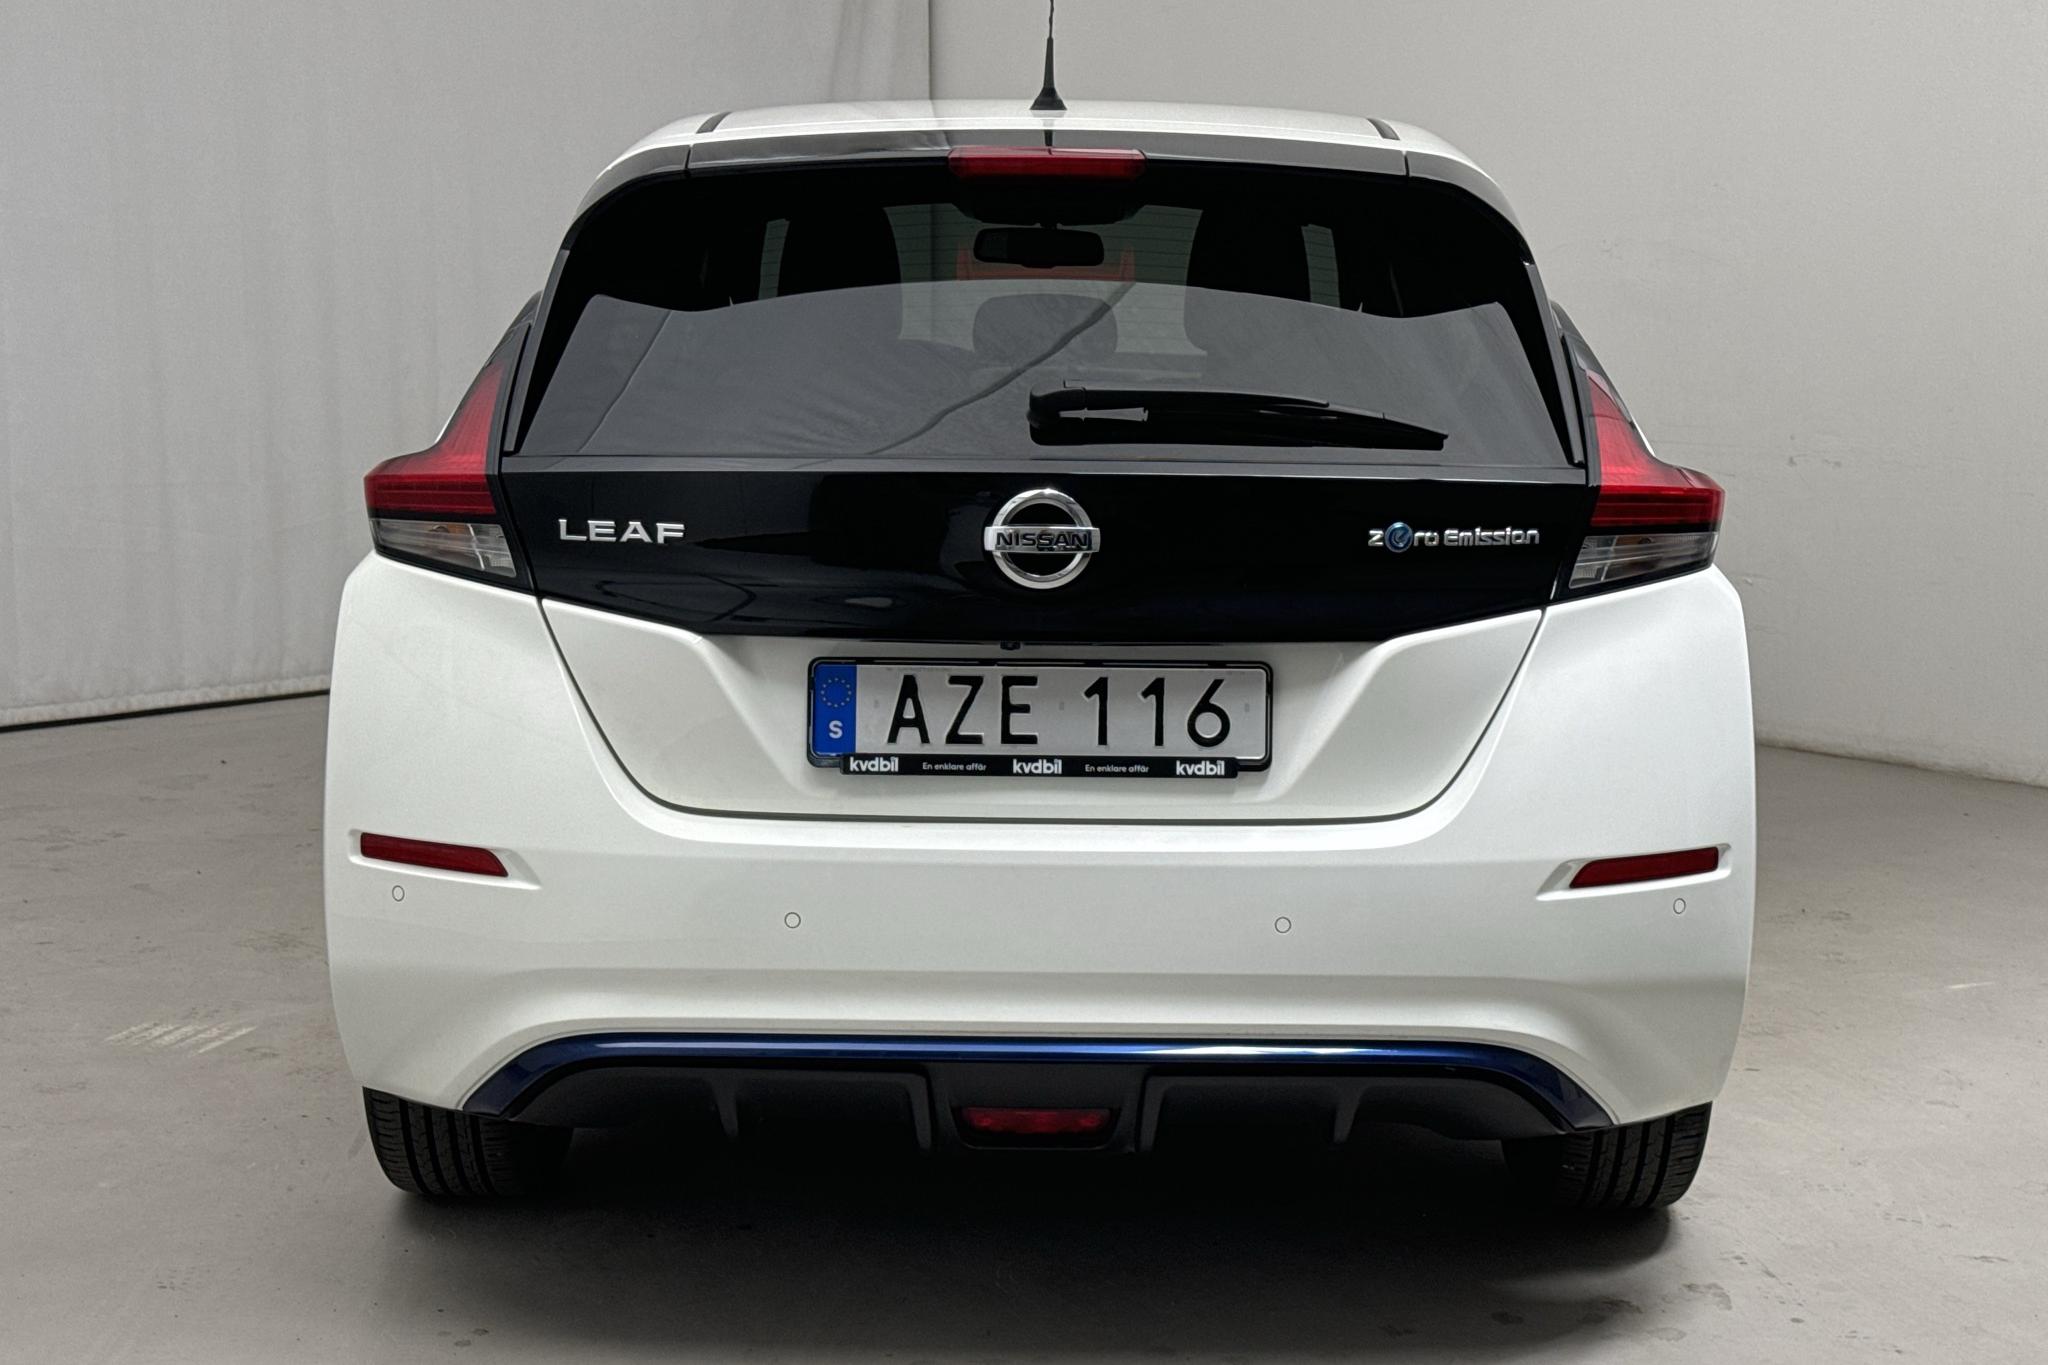 Nissan LEAF 5dr 39 kWh (150hk) - 62 920 km - Automatic - white - 2018